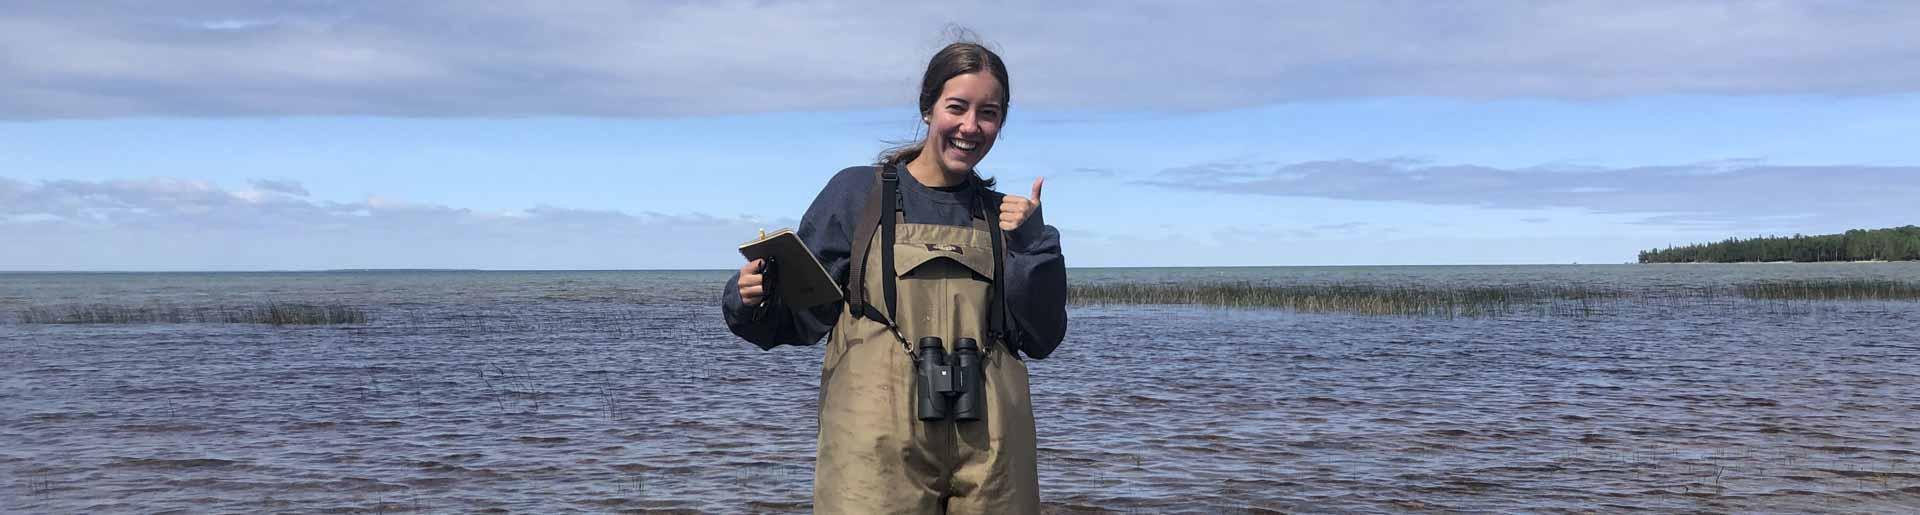 Abby Gosselink conducting research in a river.